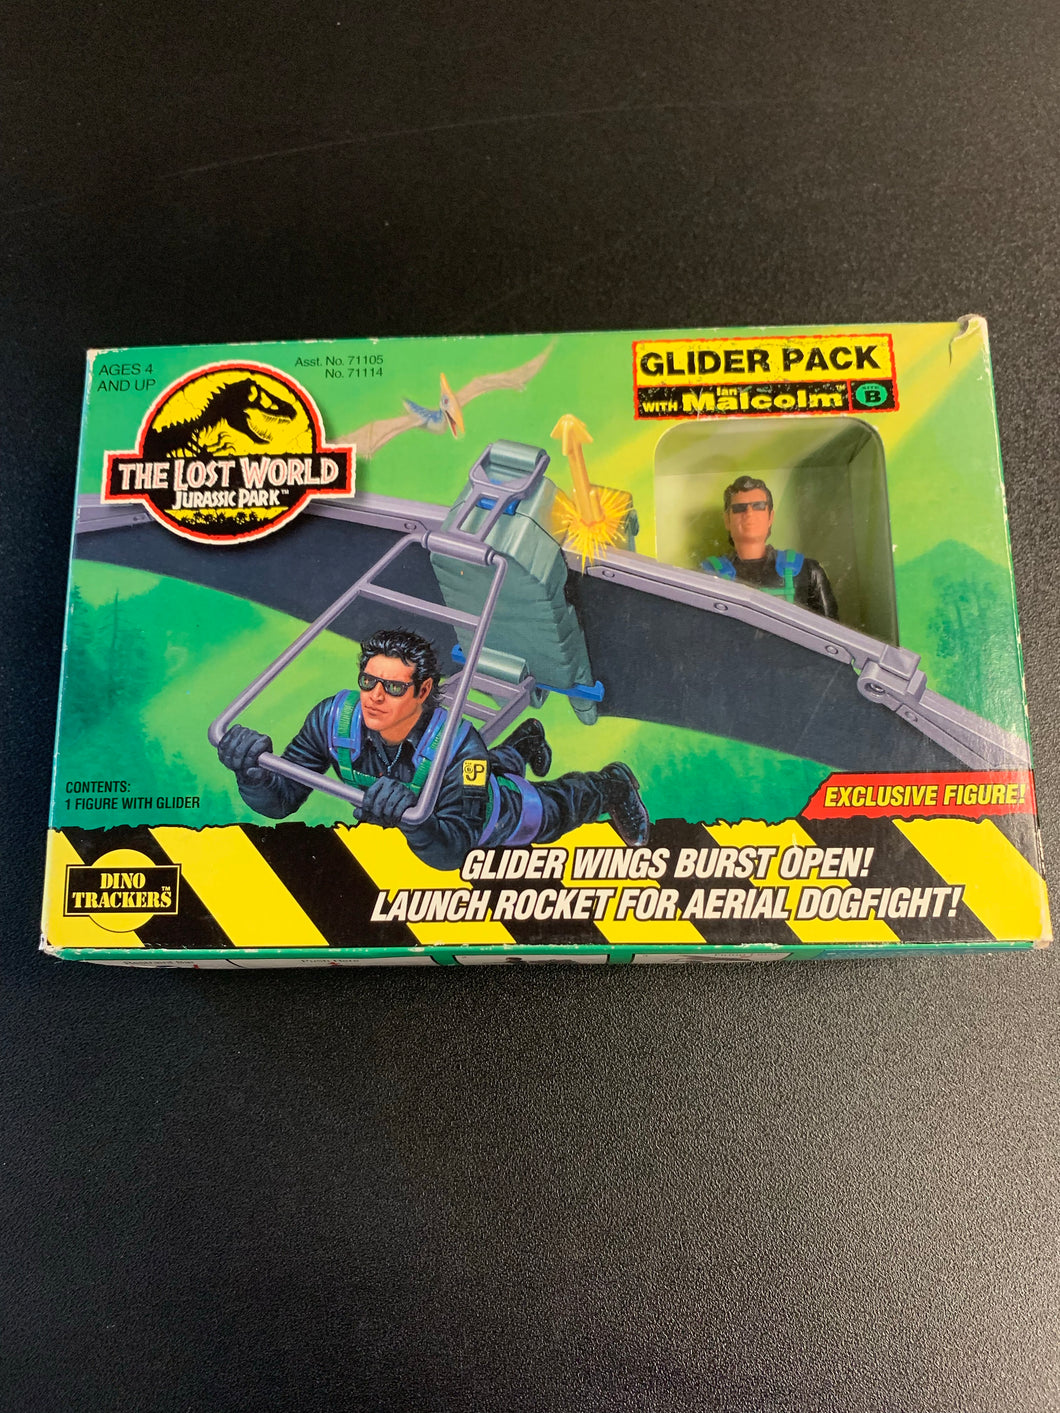 JURASSIC PARK THE LOST WORLD GLIDER PACK WITH IAN MALCOLM